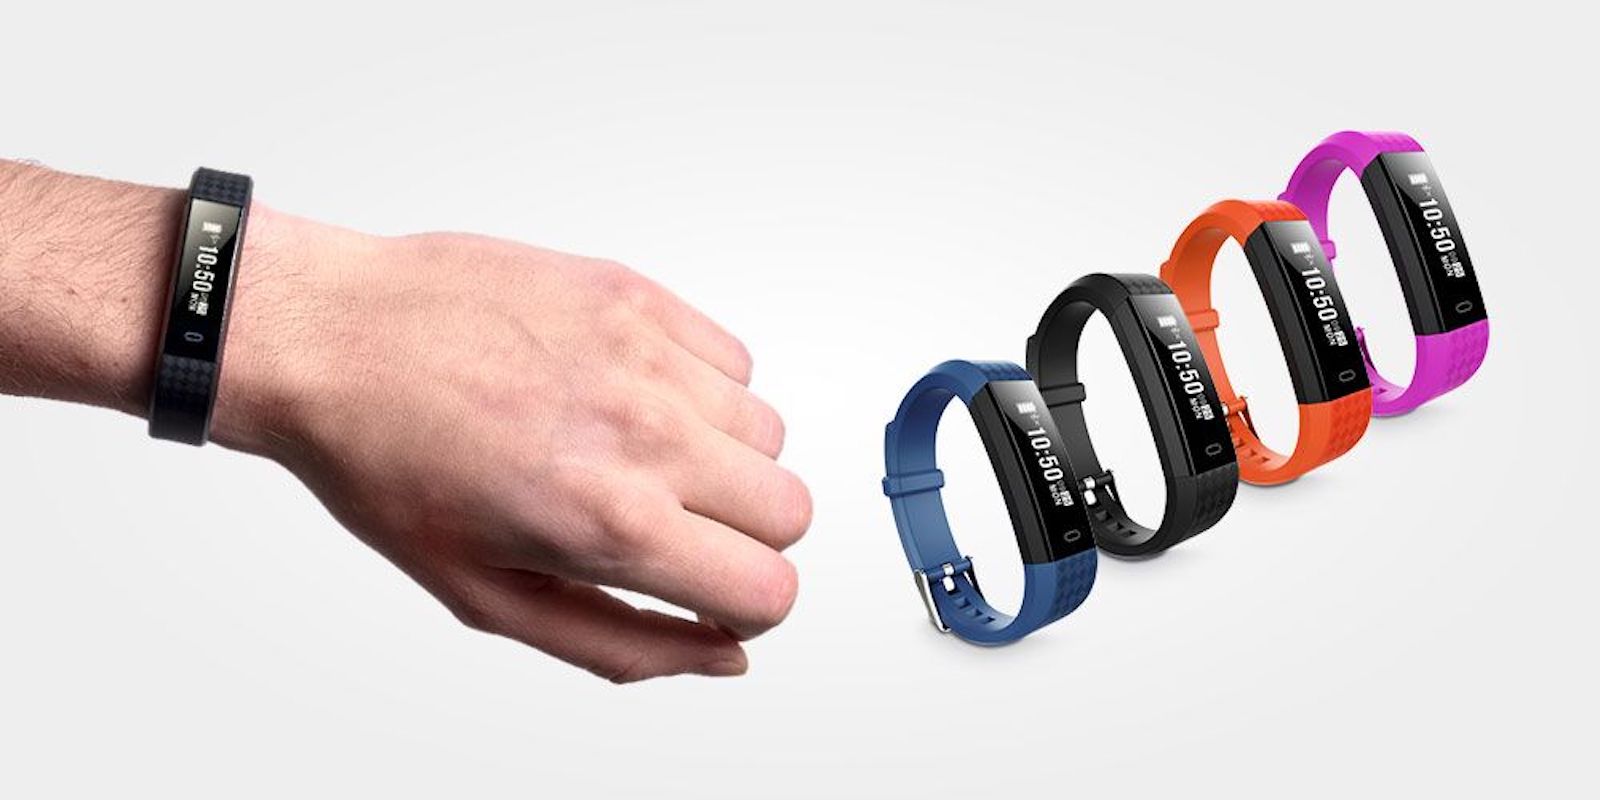 This sleek fitness tracker is packed with tools for staying on top of your health goals.